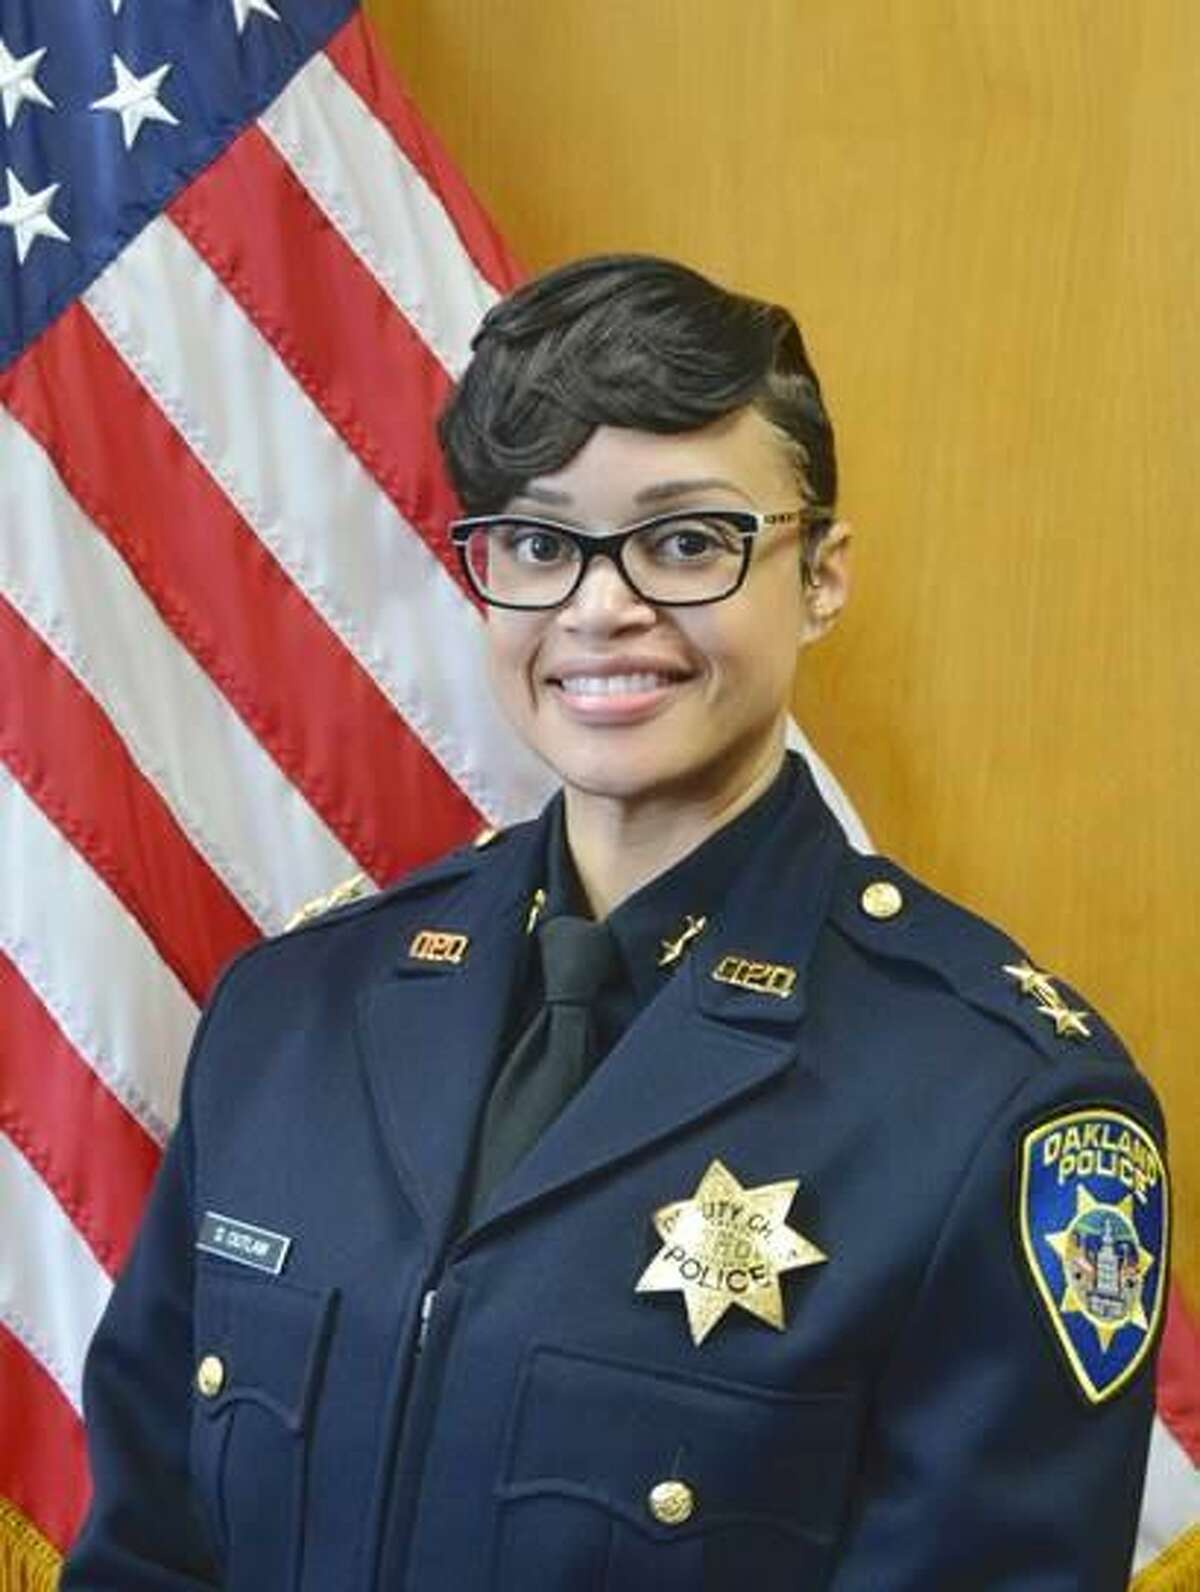 Danielle Outlaw, deputy chief of the Oakland Police Department, will leave to assume the top role in Portland in October, officials said on Monday.